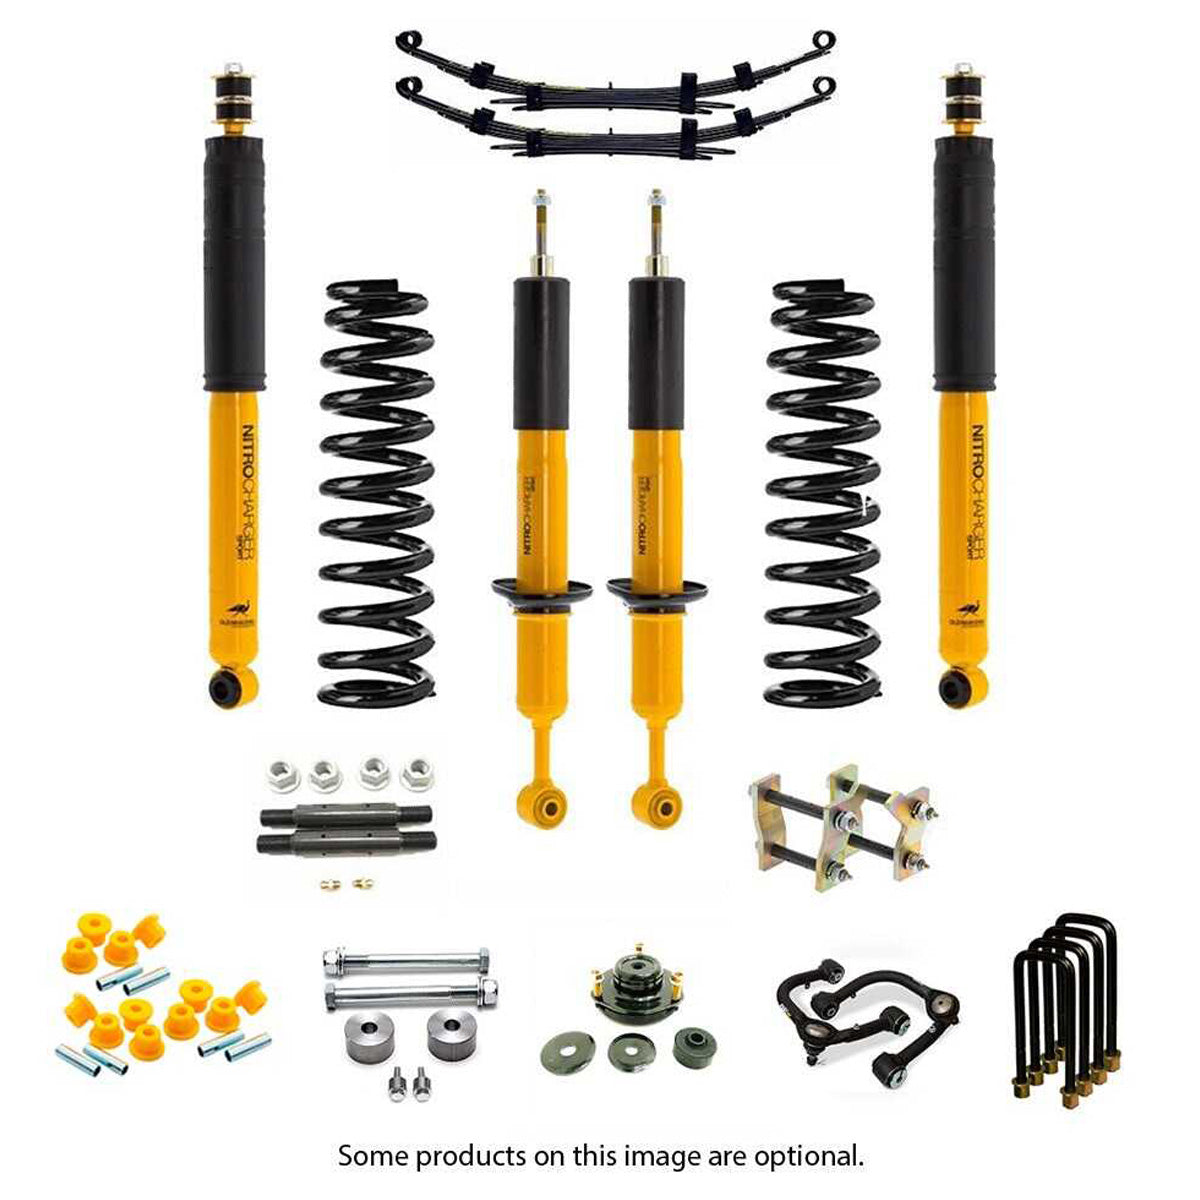 OME 2.5 - 3 inch Lift Kit for Hilux Revo, Rocco, SR5 (15-22)